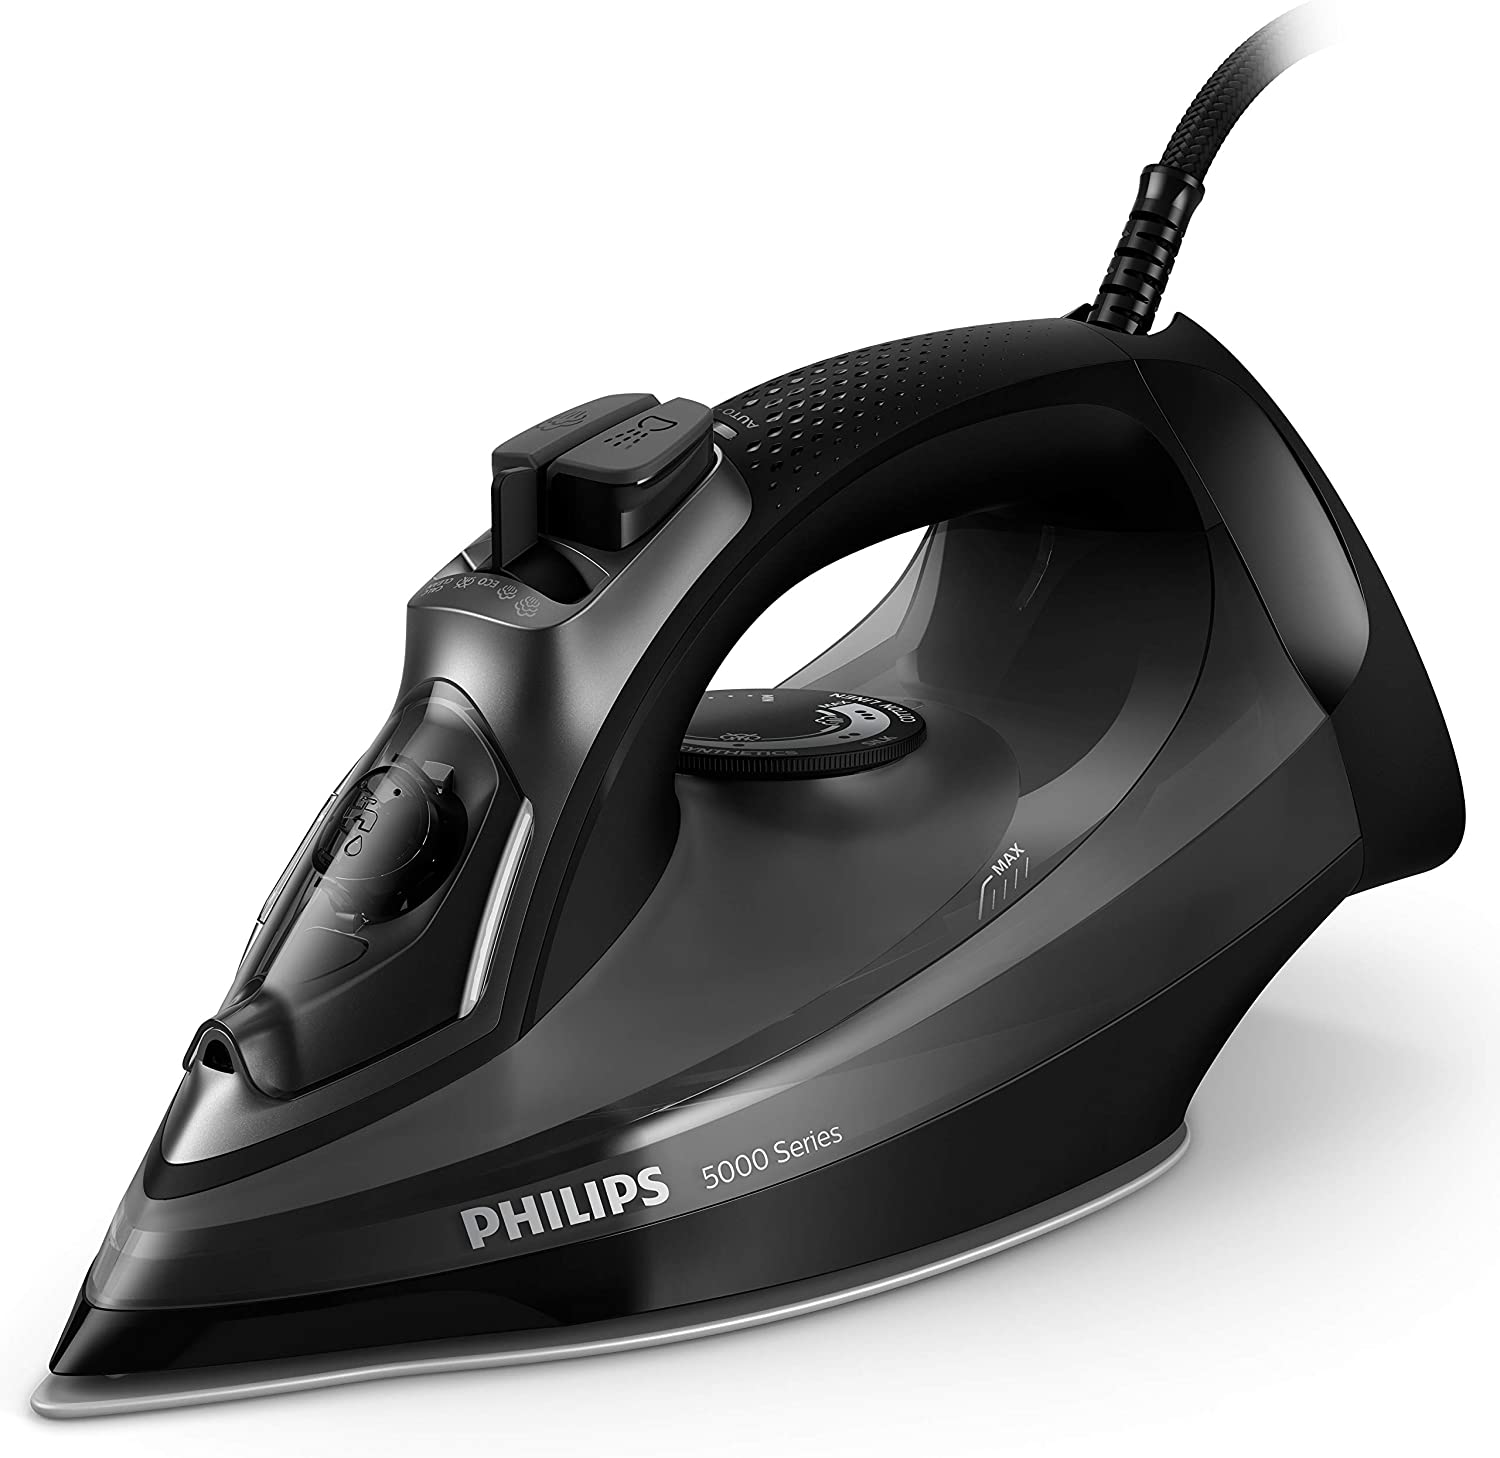 Philips Steam Iron Series 2600 W Black | reliable performance | lightweight | variable steam settings | safety features | stylish | even heat distribution | Halabh.com